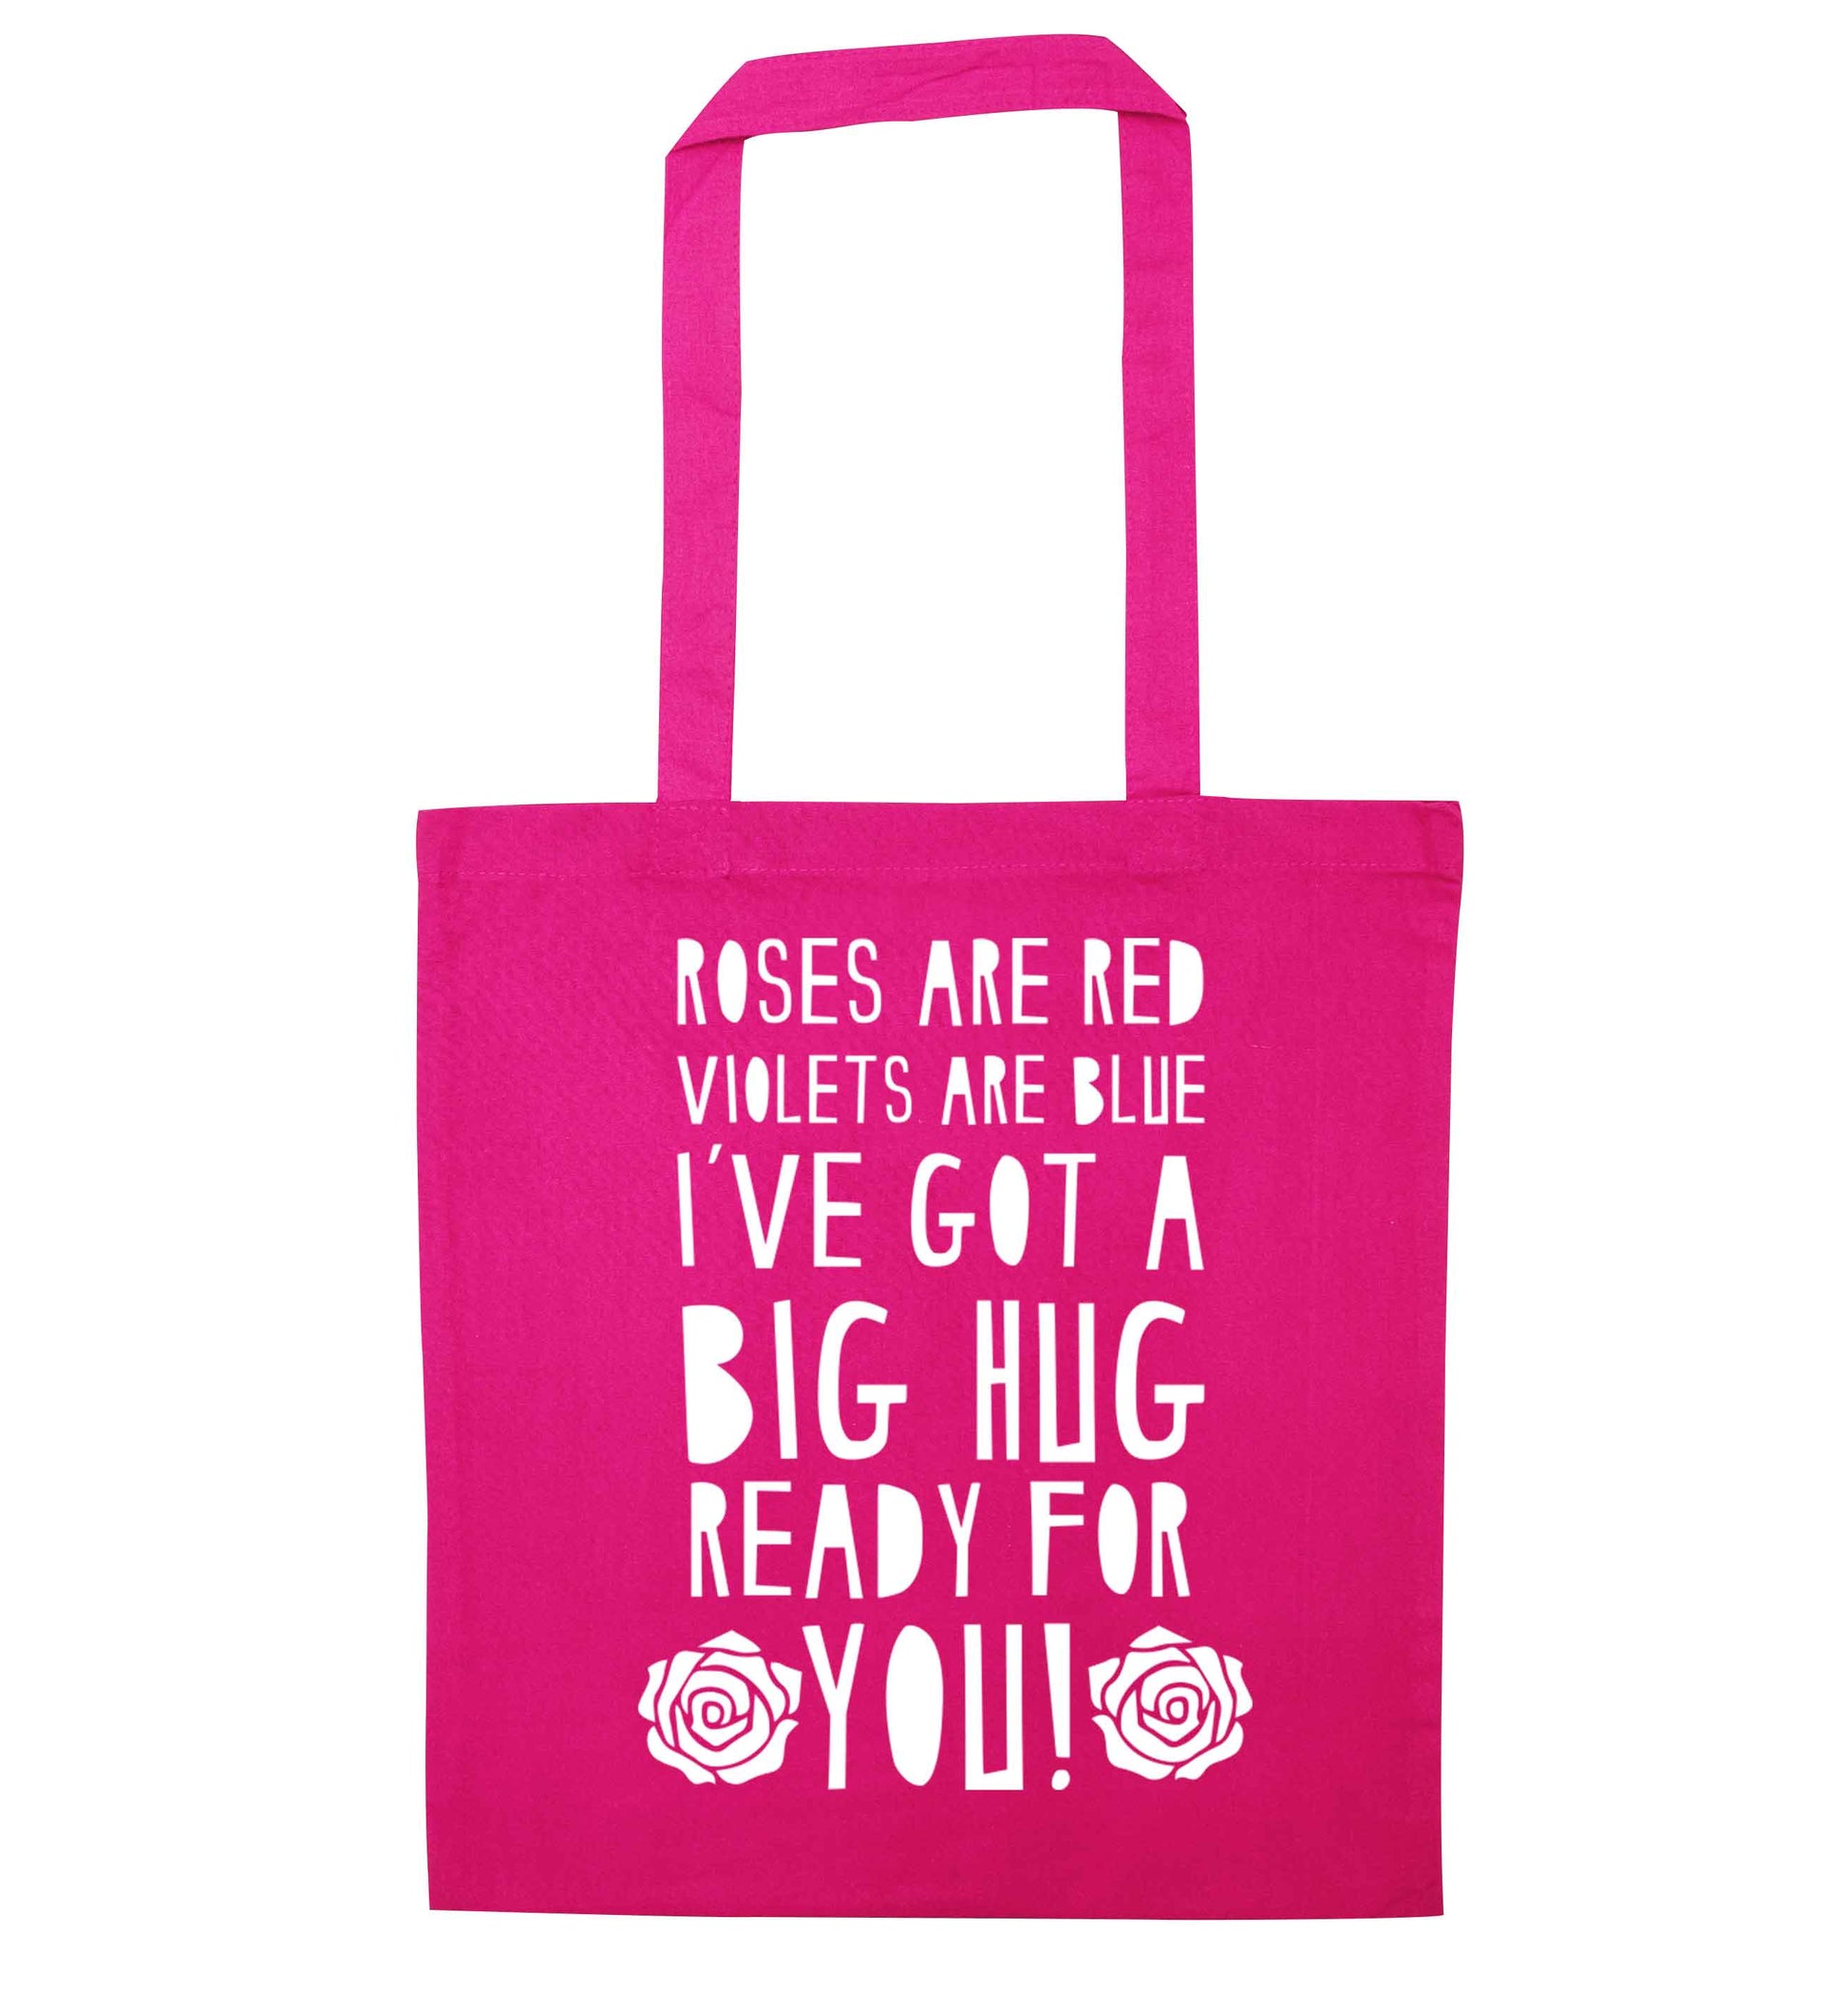 Roses are red violets are blue I've got a big hug coming for you pink tote bag